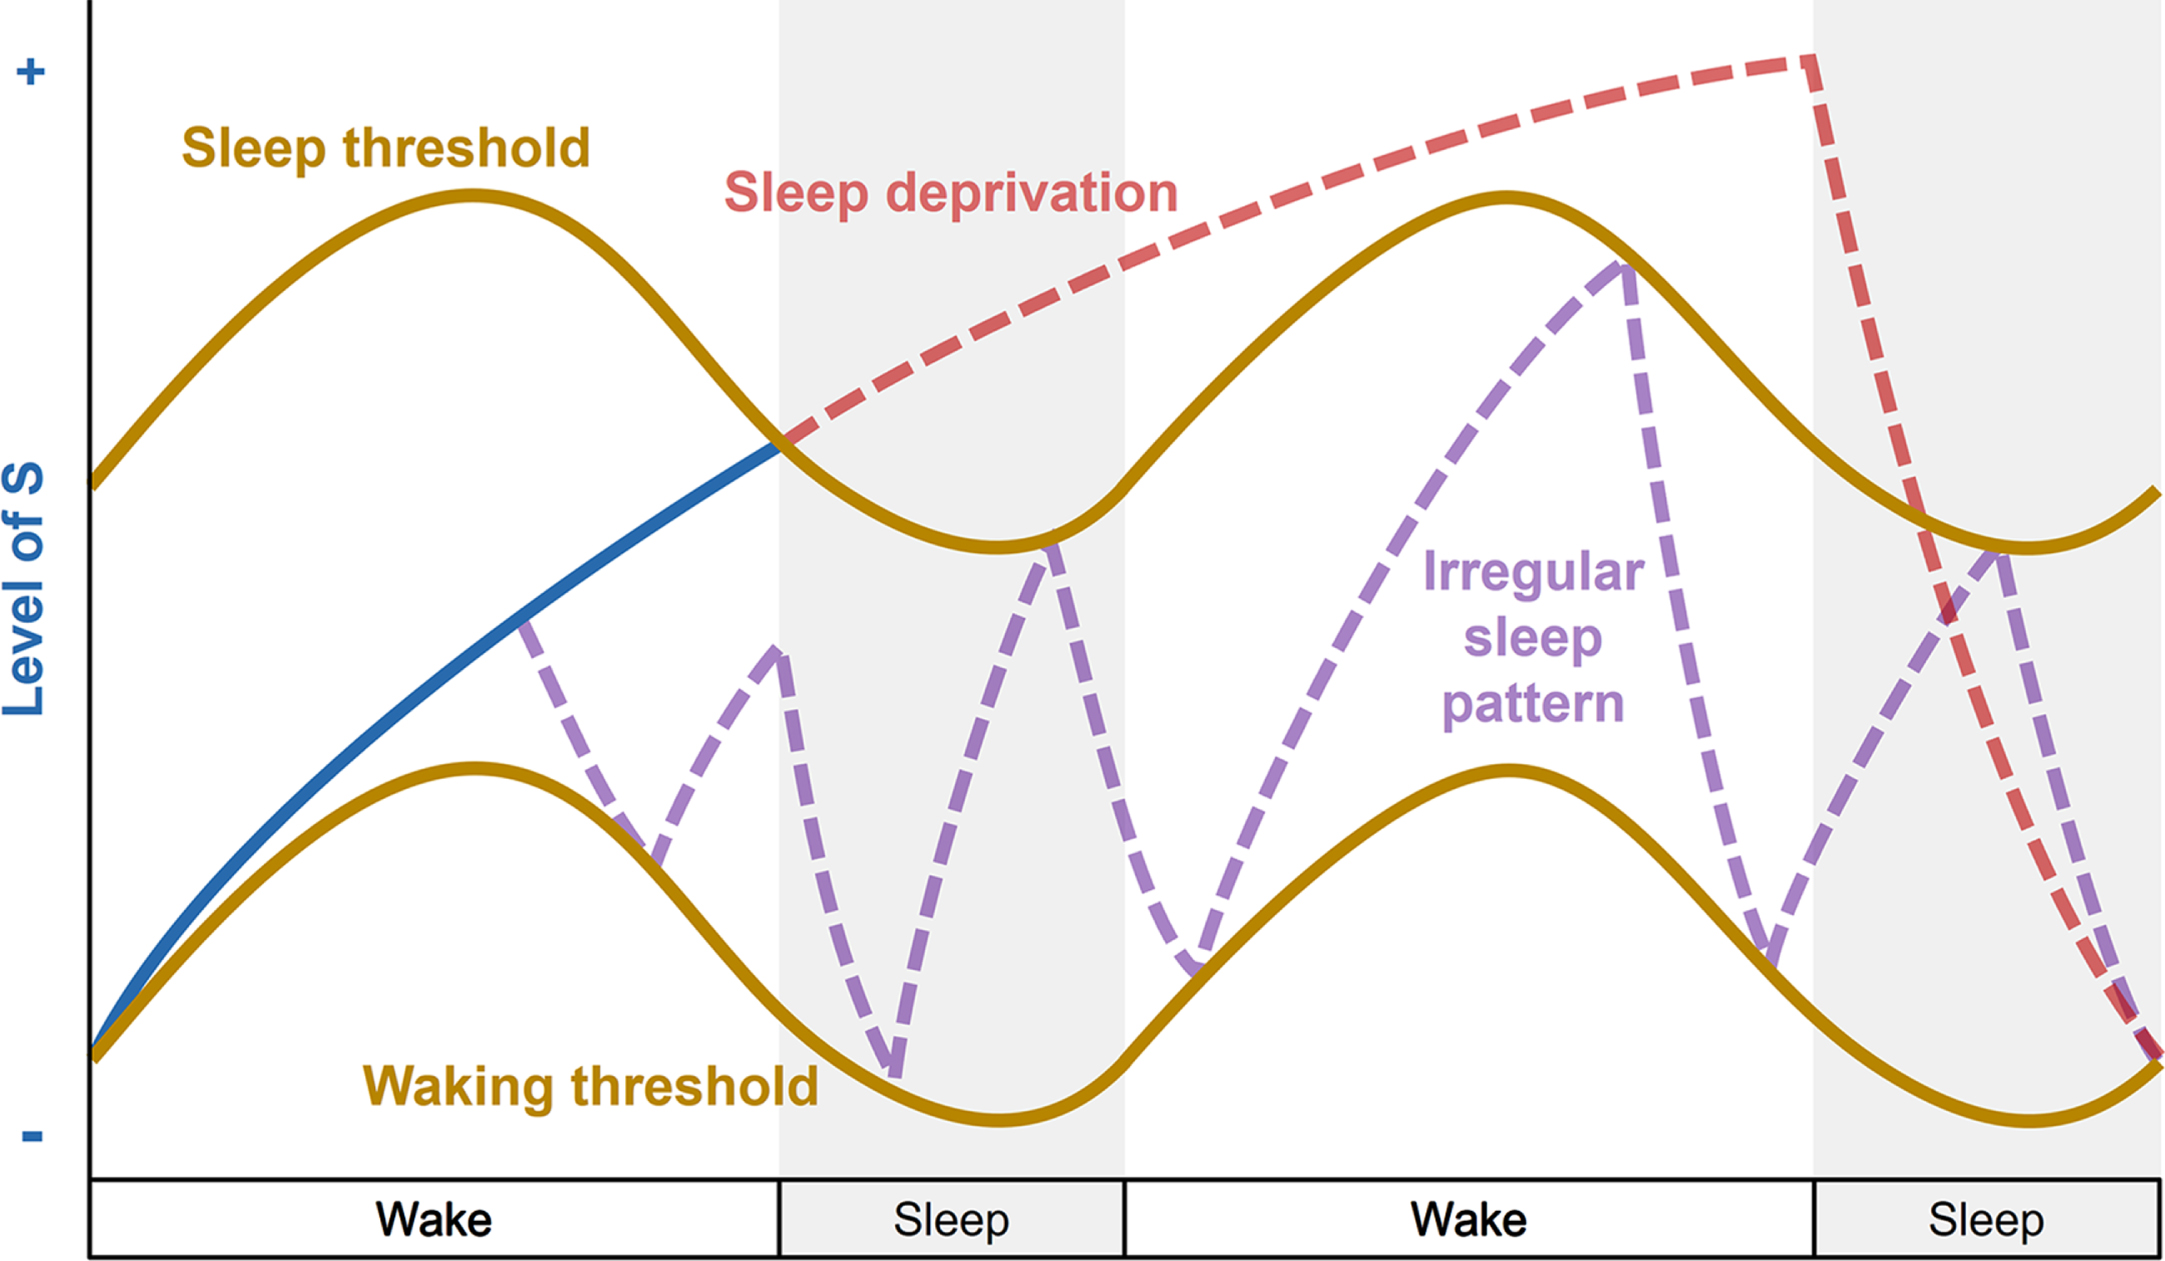 Disturbances of the two-process model of sleep regulation. Simplified representation of the homeostatic process S (blue line) and circadian process C (brown lines) over a two-day period with 16 hours of wakefulness and 8 hours of sleep (grey bars) when an individual experiences sleep deprivation (red line) or irregular sleep pattern (purple line). During sleep deprivation, the individual stays awake when the increasing process S (blue line) reaches the upper threshold of process C, and sleep pressure continues to build up for 24 hours (increasing red line). Recovery sleep then allows the decrease of process S. An irregular sleep pattern is shown in purple, when an individual experiences frequent sleep episodes (decreasing sleep pressure) and awakenings (increasing sleep pressure) irrespective of normal wake and sleep time windows, and disconnected from circadian process C.